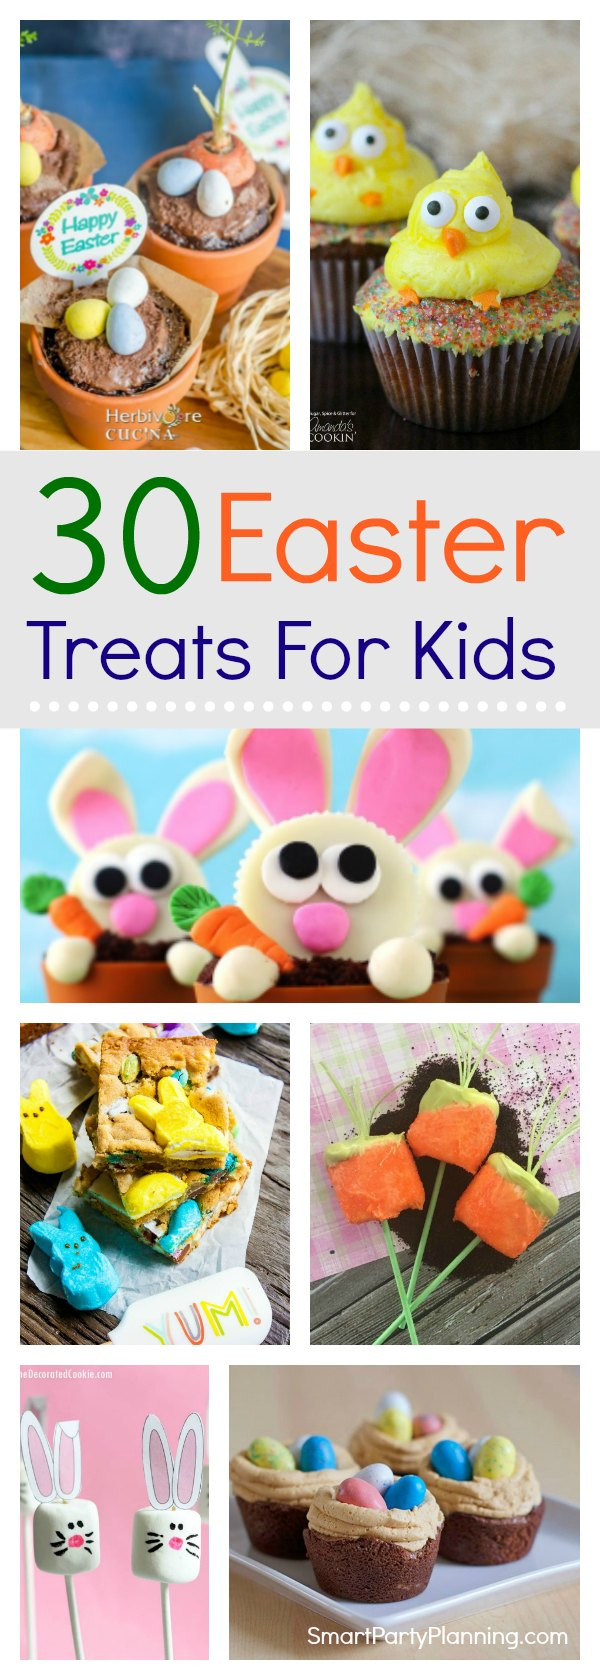 School Easter Party Ideas
 30 of The Most Amazing and Easy Easter Treats For Kids